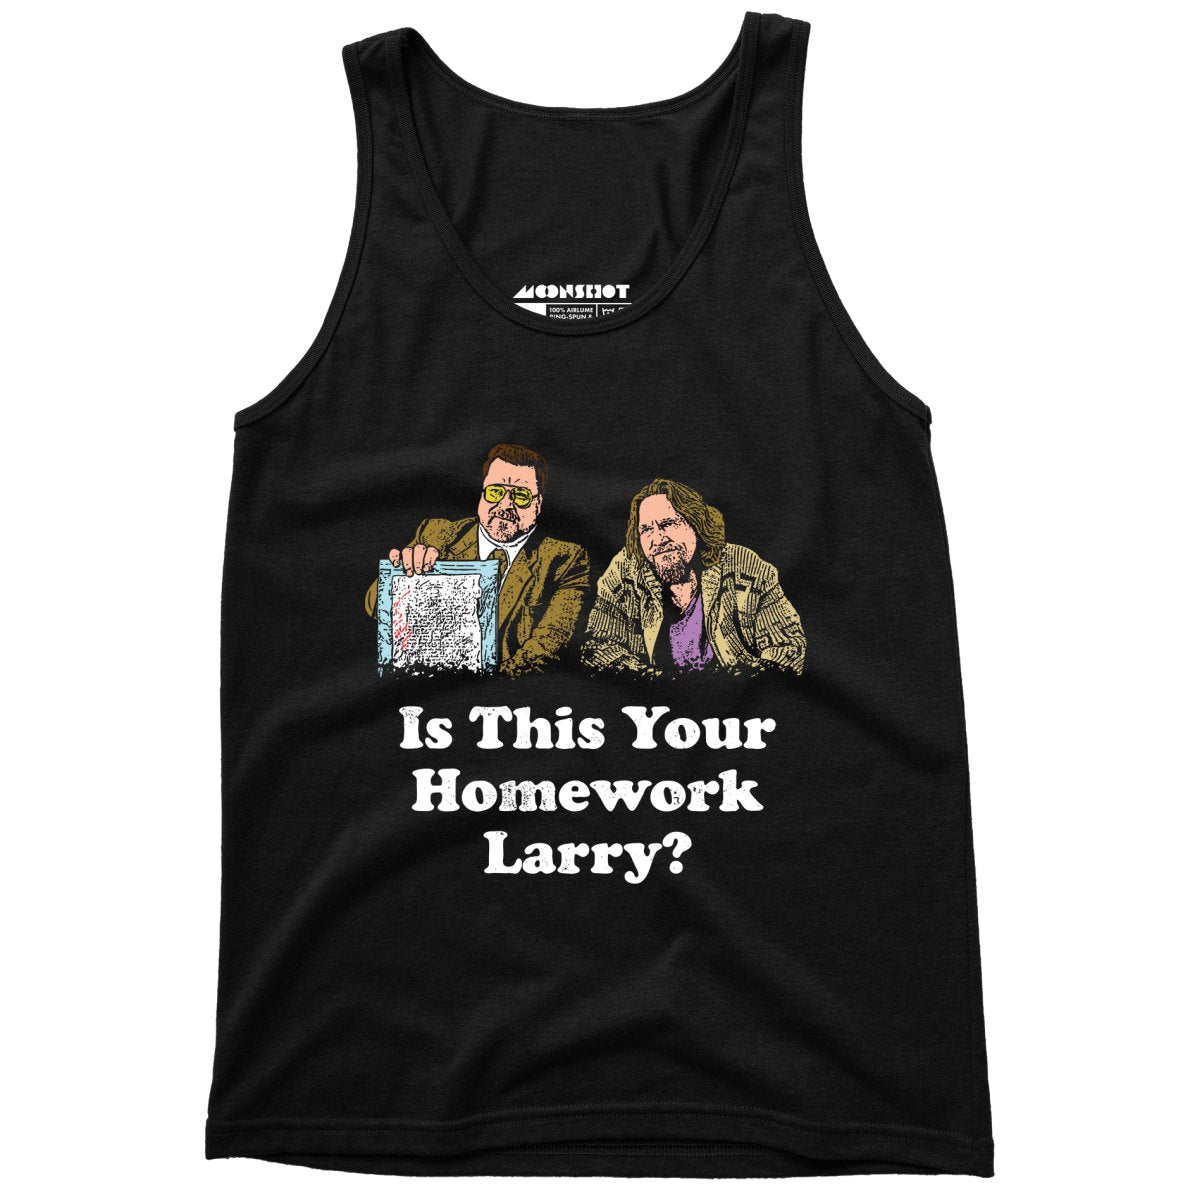 Is This Your Homework, Larry? - Unisex Tank Top